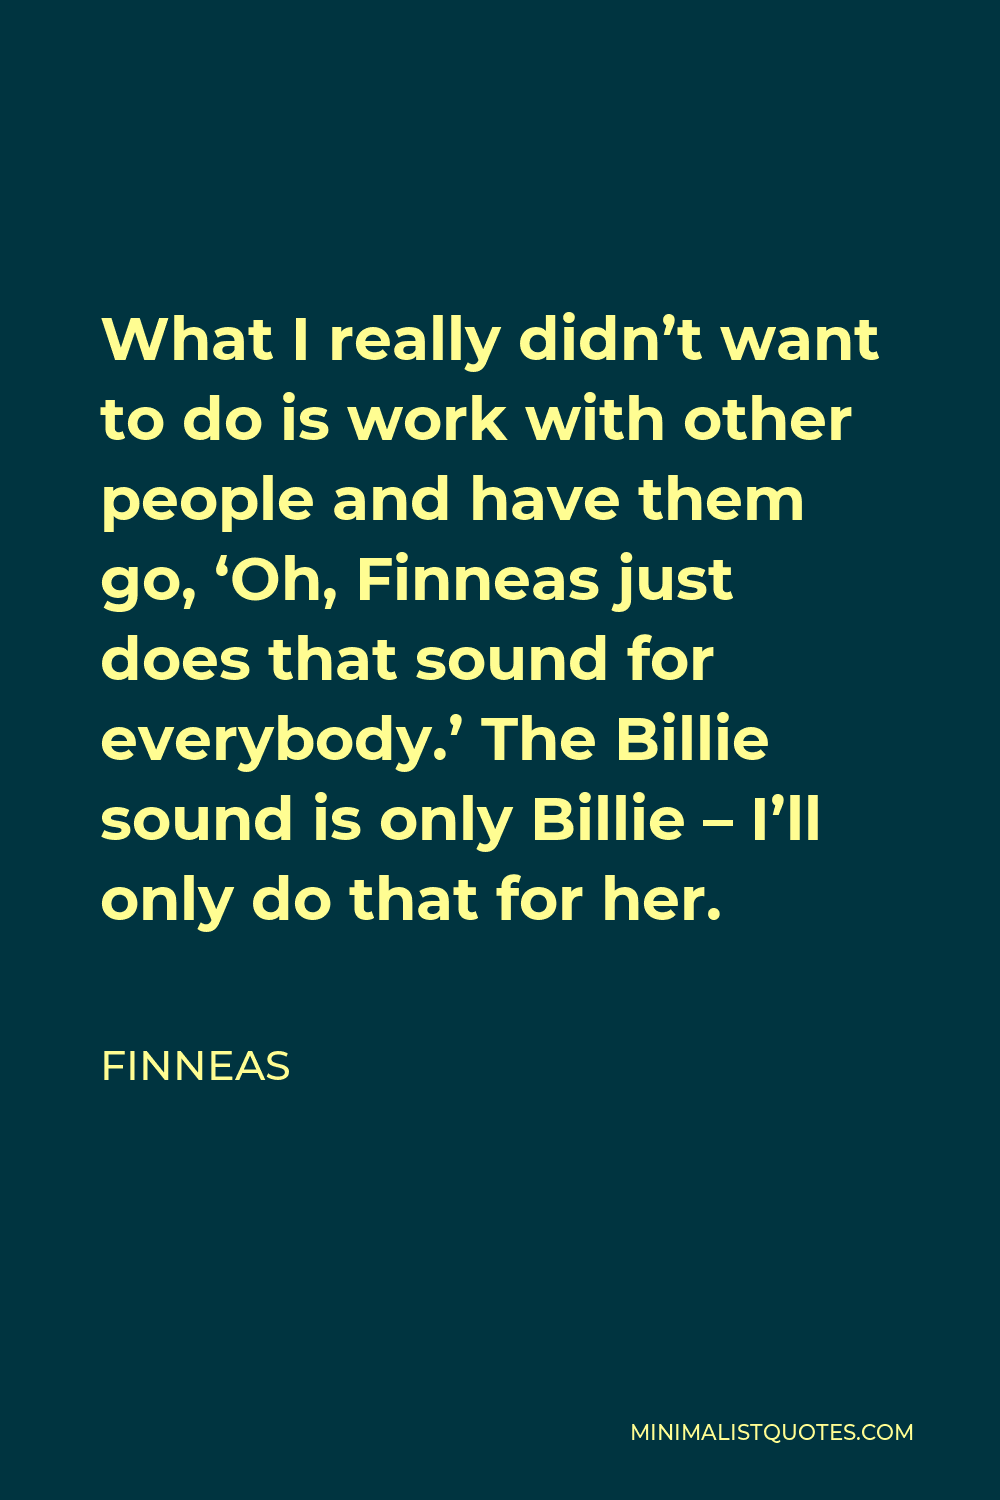 Finneas Quote - What I really didn’t want to do is work with other people and have them go, ‘Oh, Finneas just does that sound for everybody.’ The Billie sound is only Billie – I’ll only do that for her.